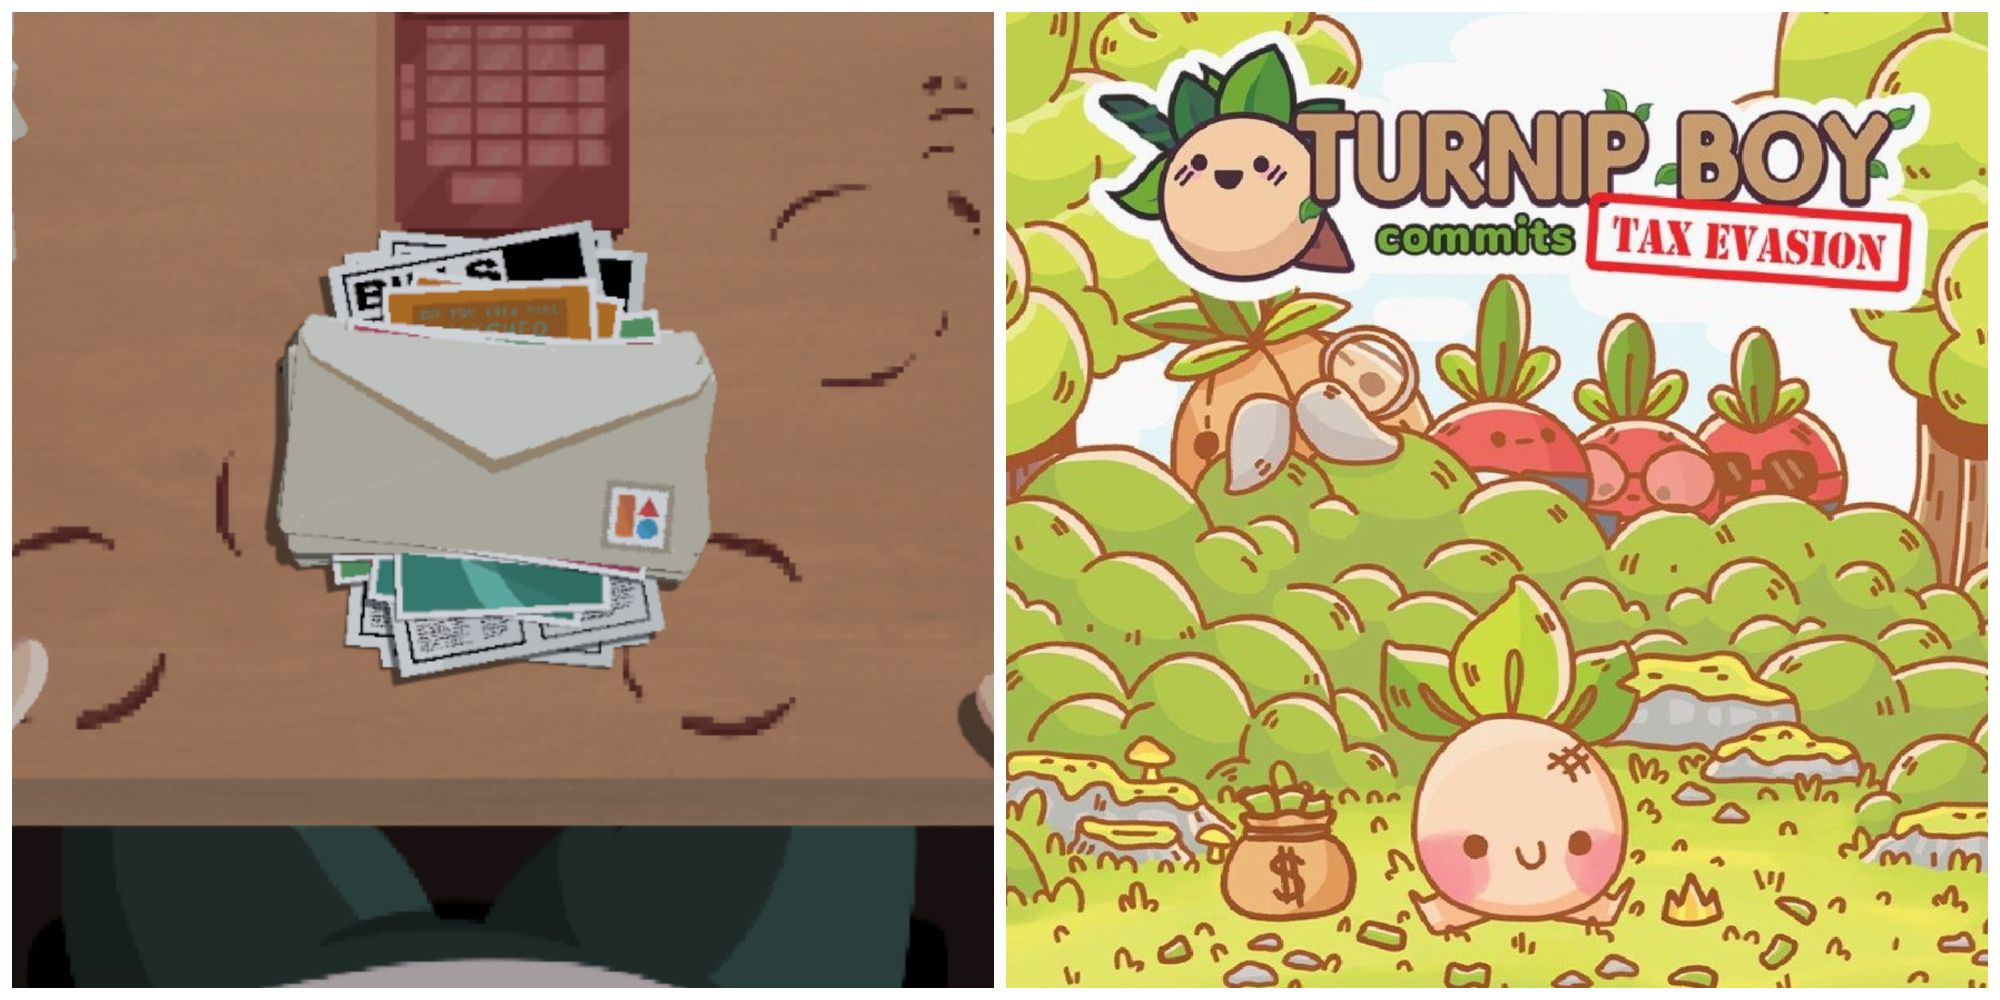 Left: A pile of mail on a coffee-stained desk. Right: a smiling turnip sitting in the forest next to a bag of money.